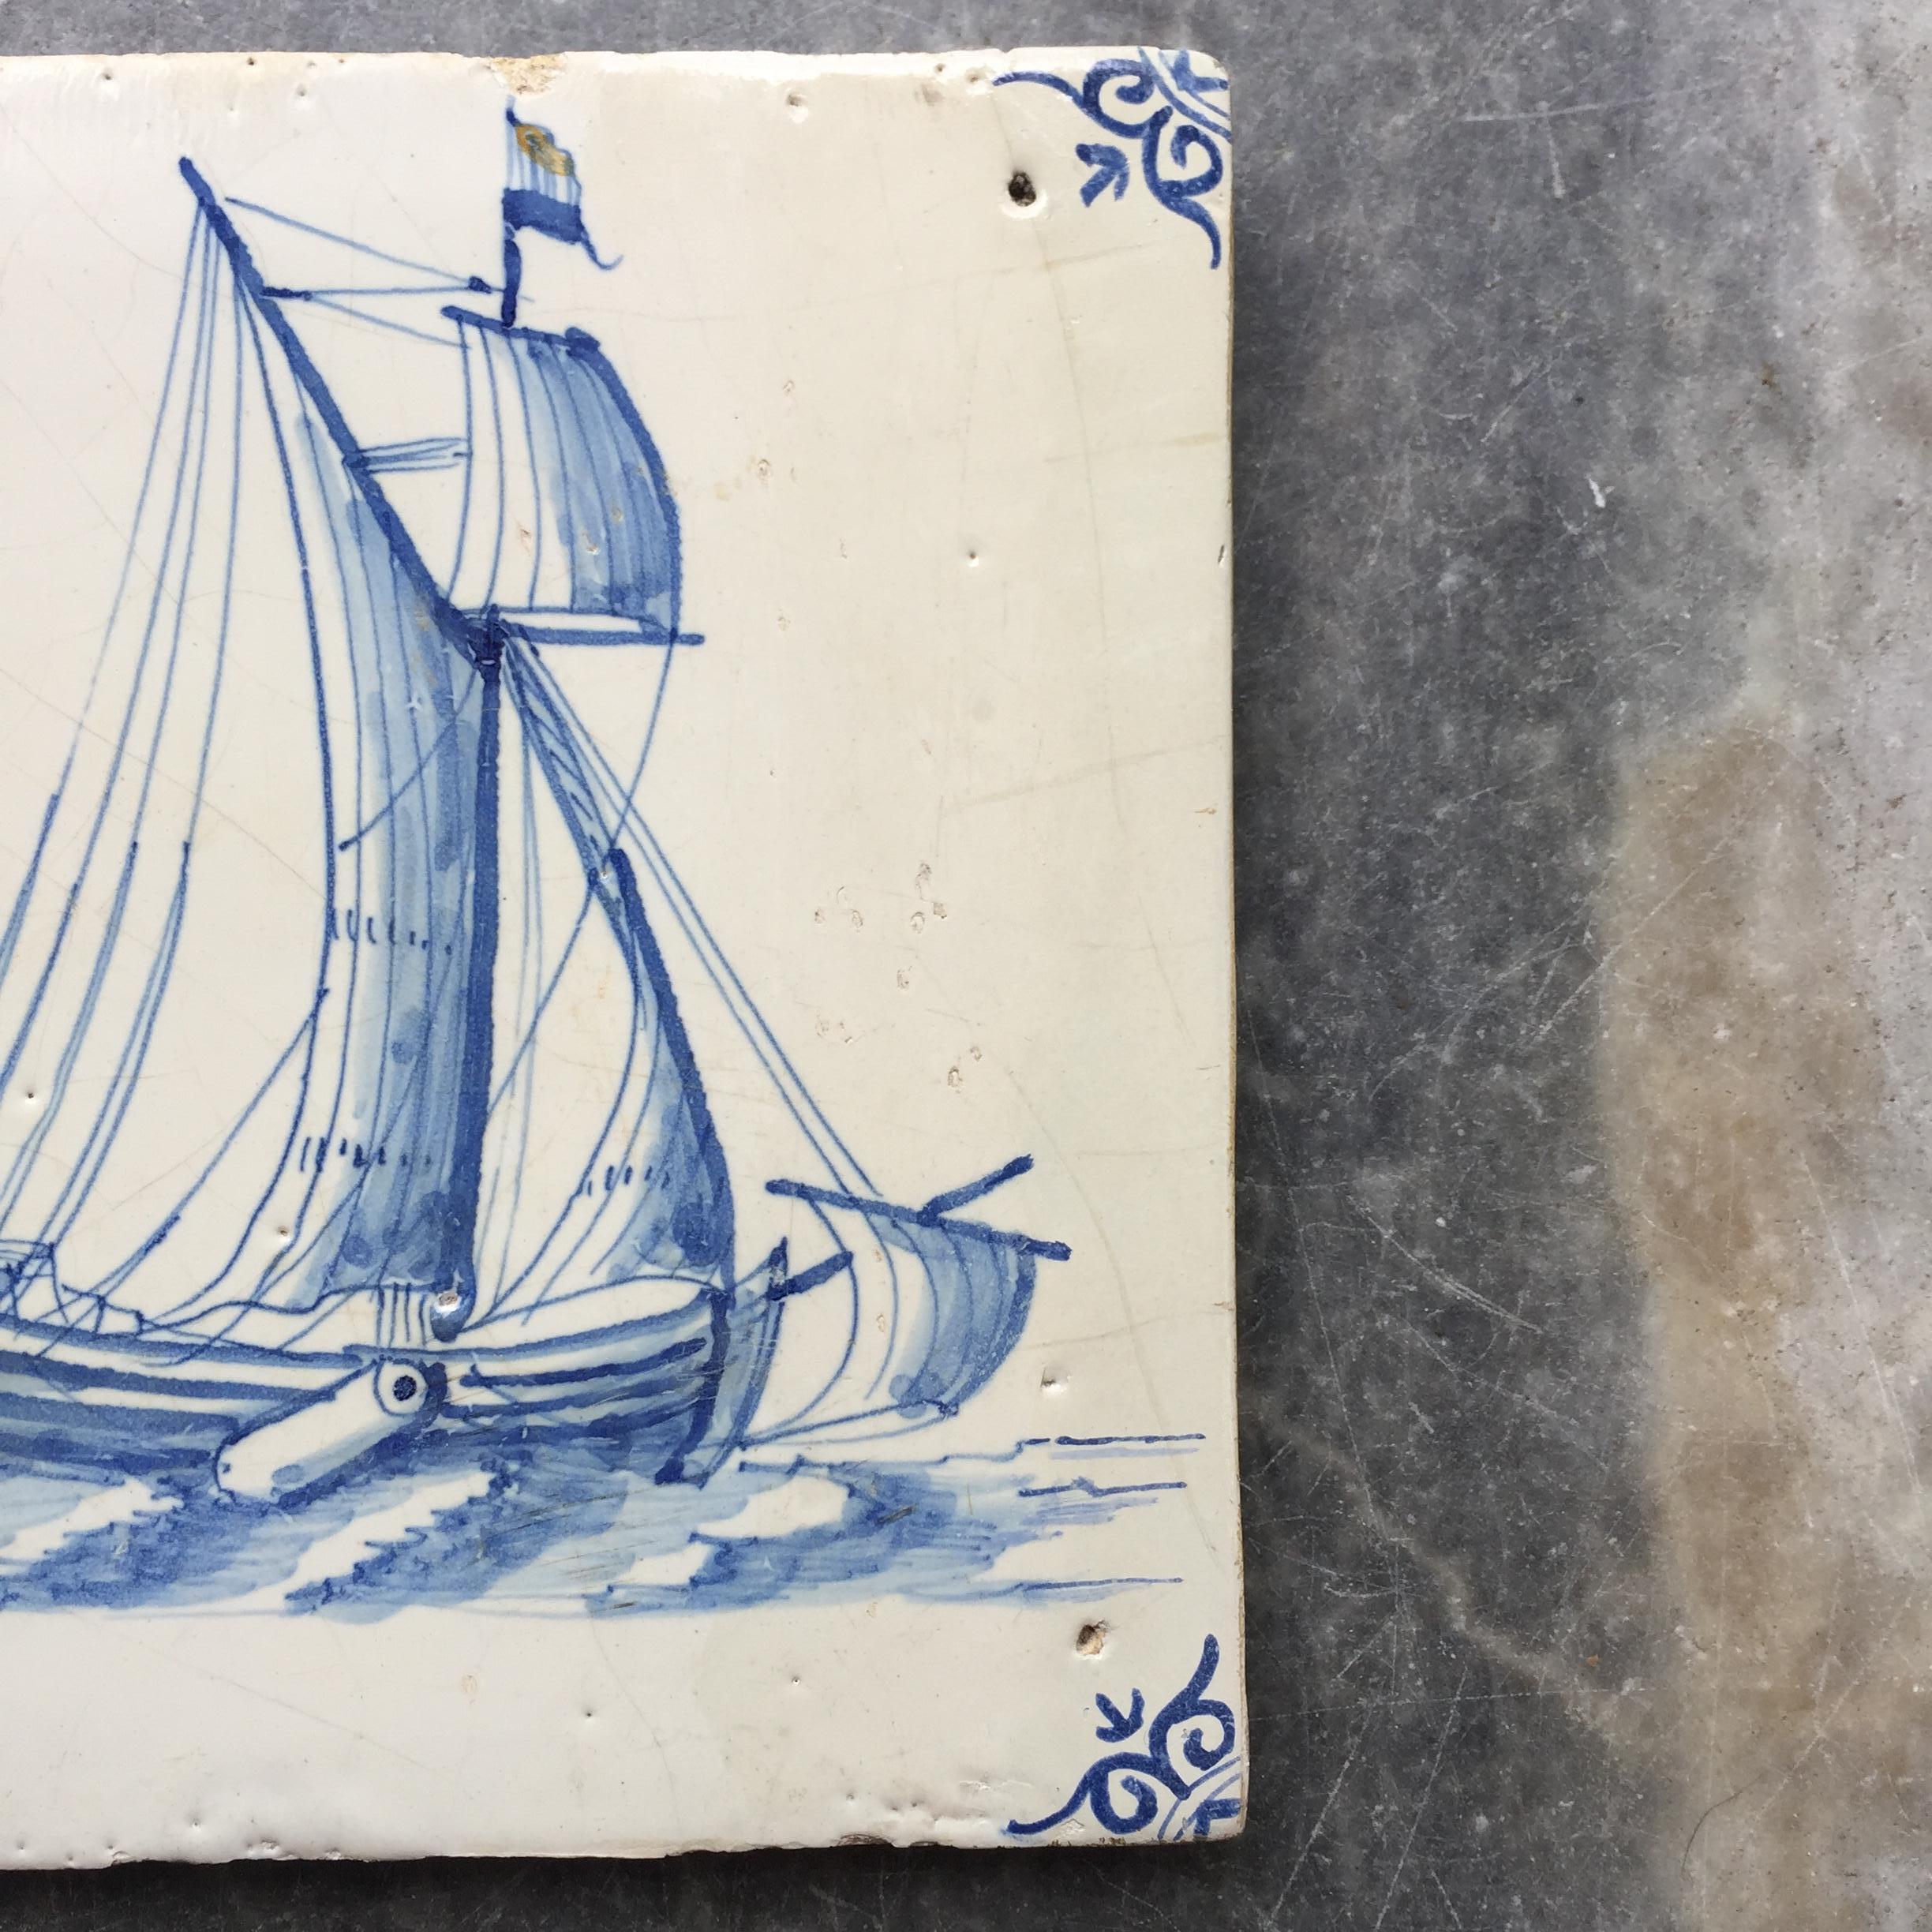 Baroque Rare Dutch Delft Tile with Yacht with Dutch Flags, Early 17th Century